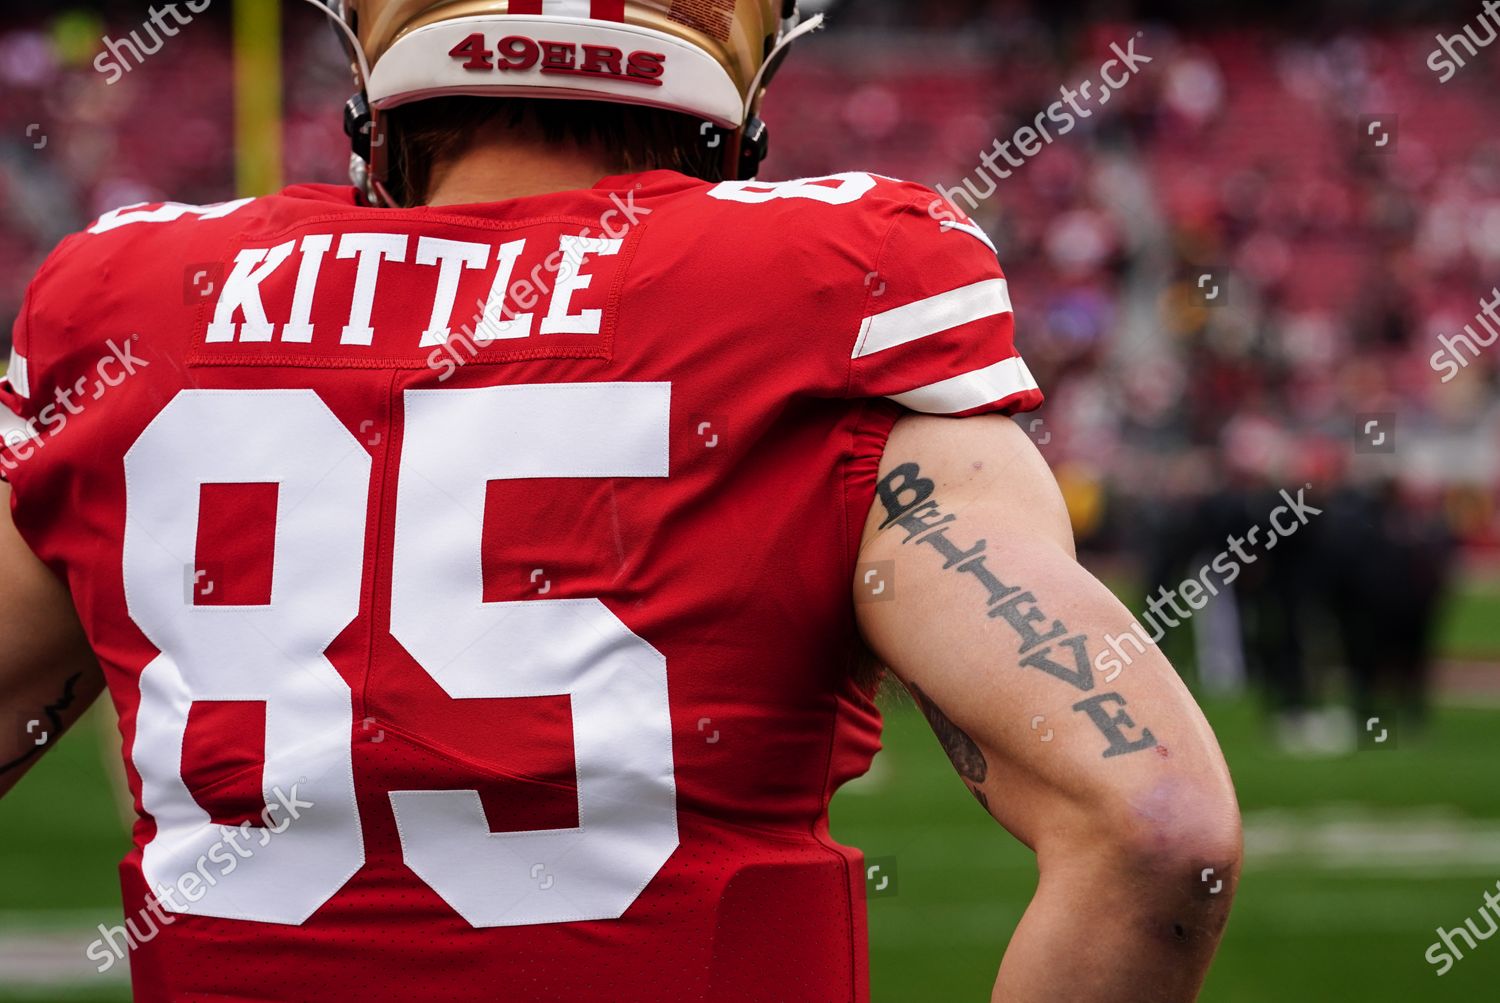 George Kittle Discusses Jimmy Garoppolo the 49ers NFL Draft and More   10 Questions  The Ringer  YouTube